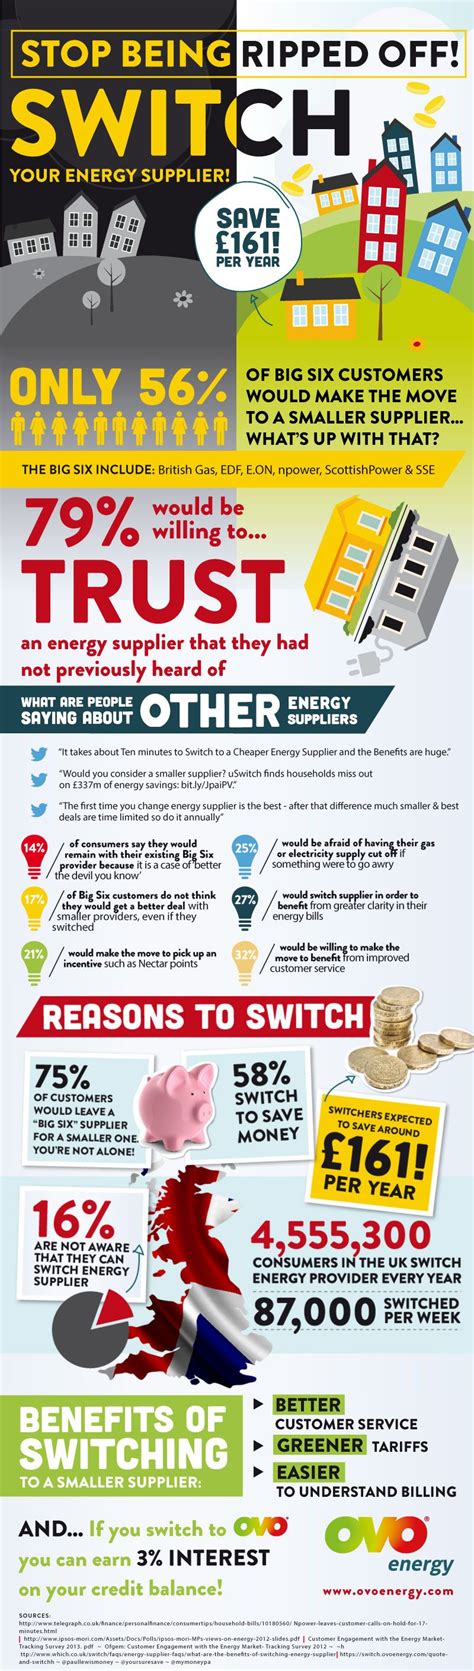 Switch Energy Supplier Infographic Energy Suppliers Switch Energy